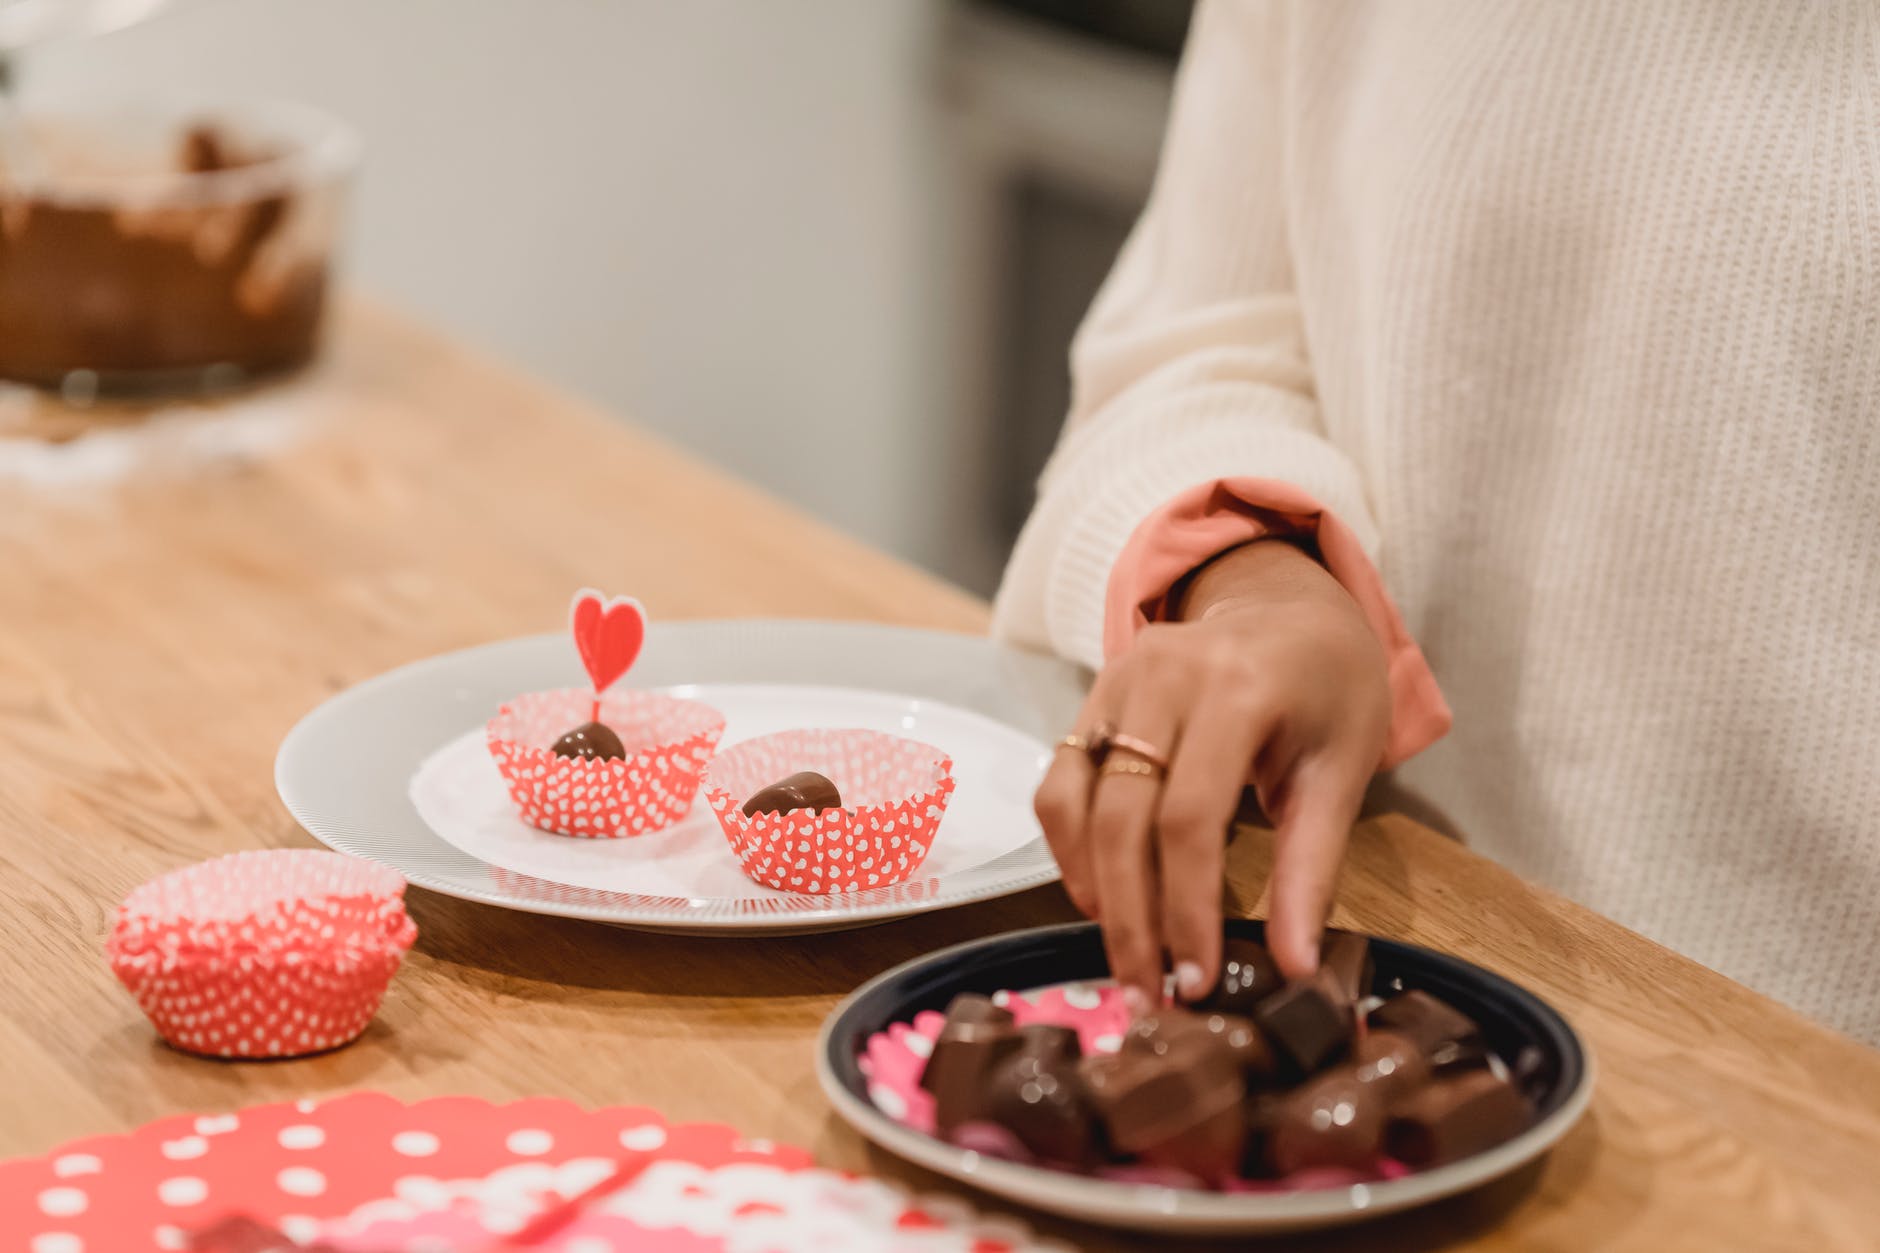 black woman taking chocolate sweets from plate near festive dessert